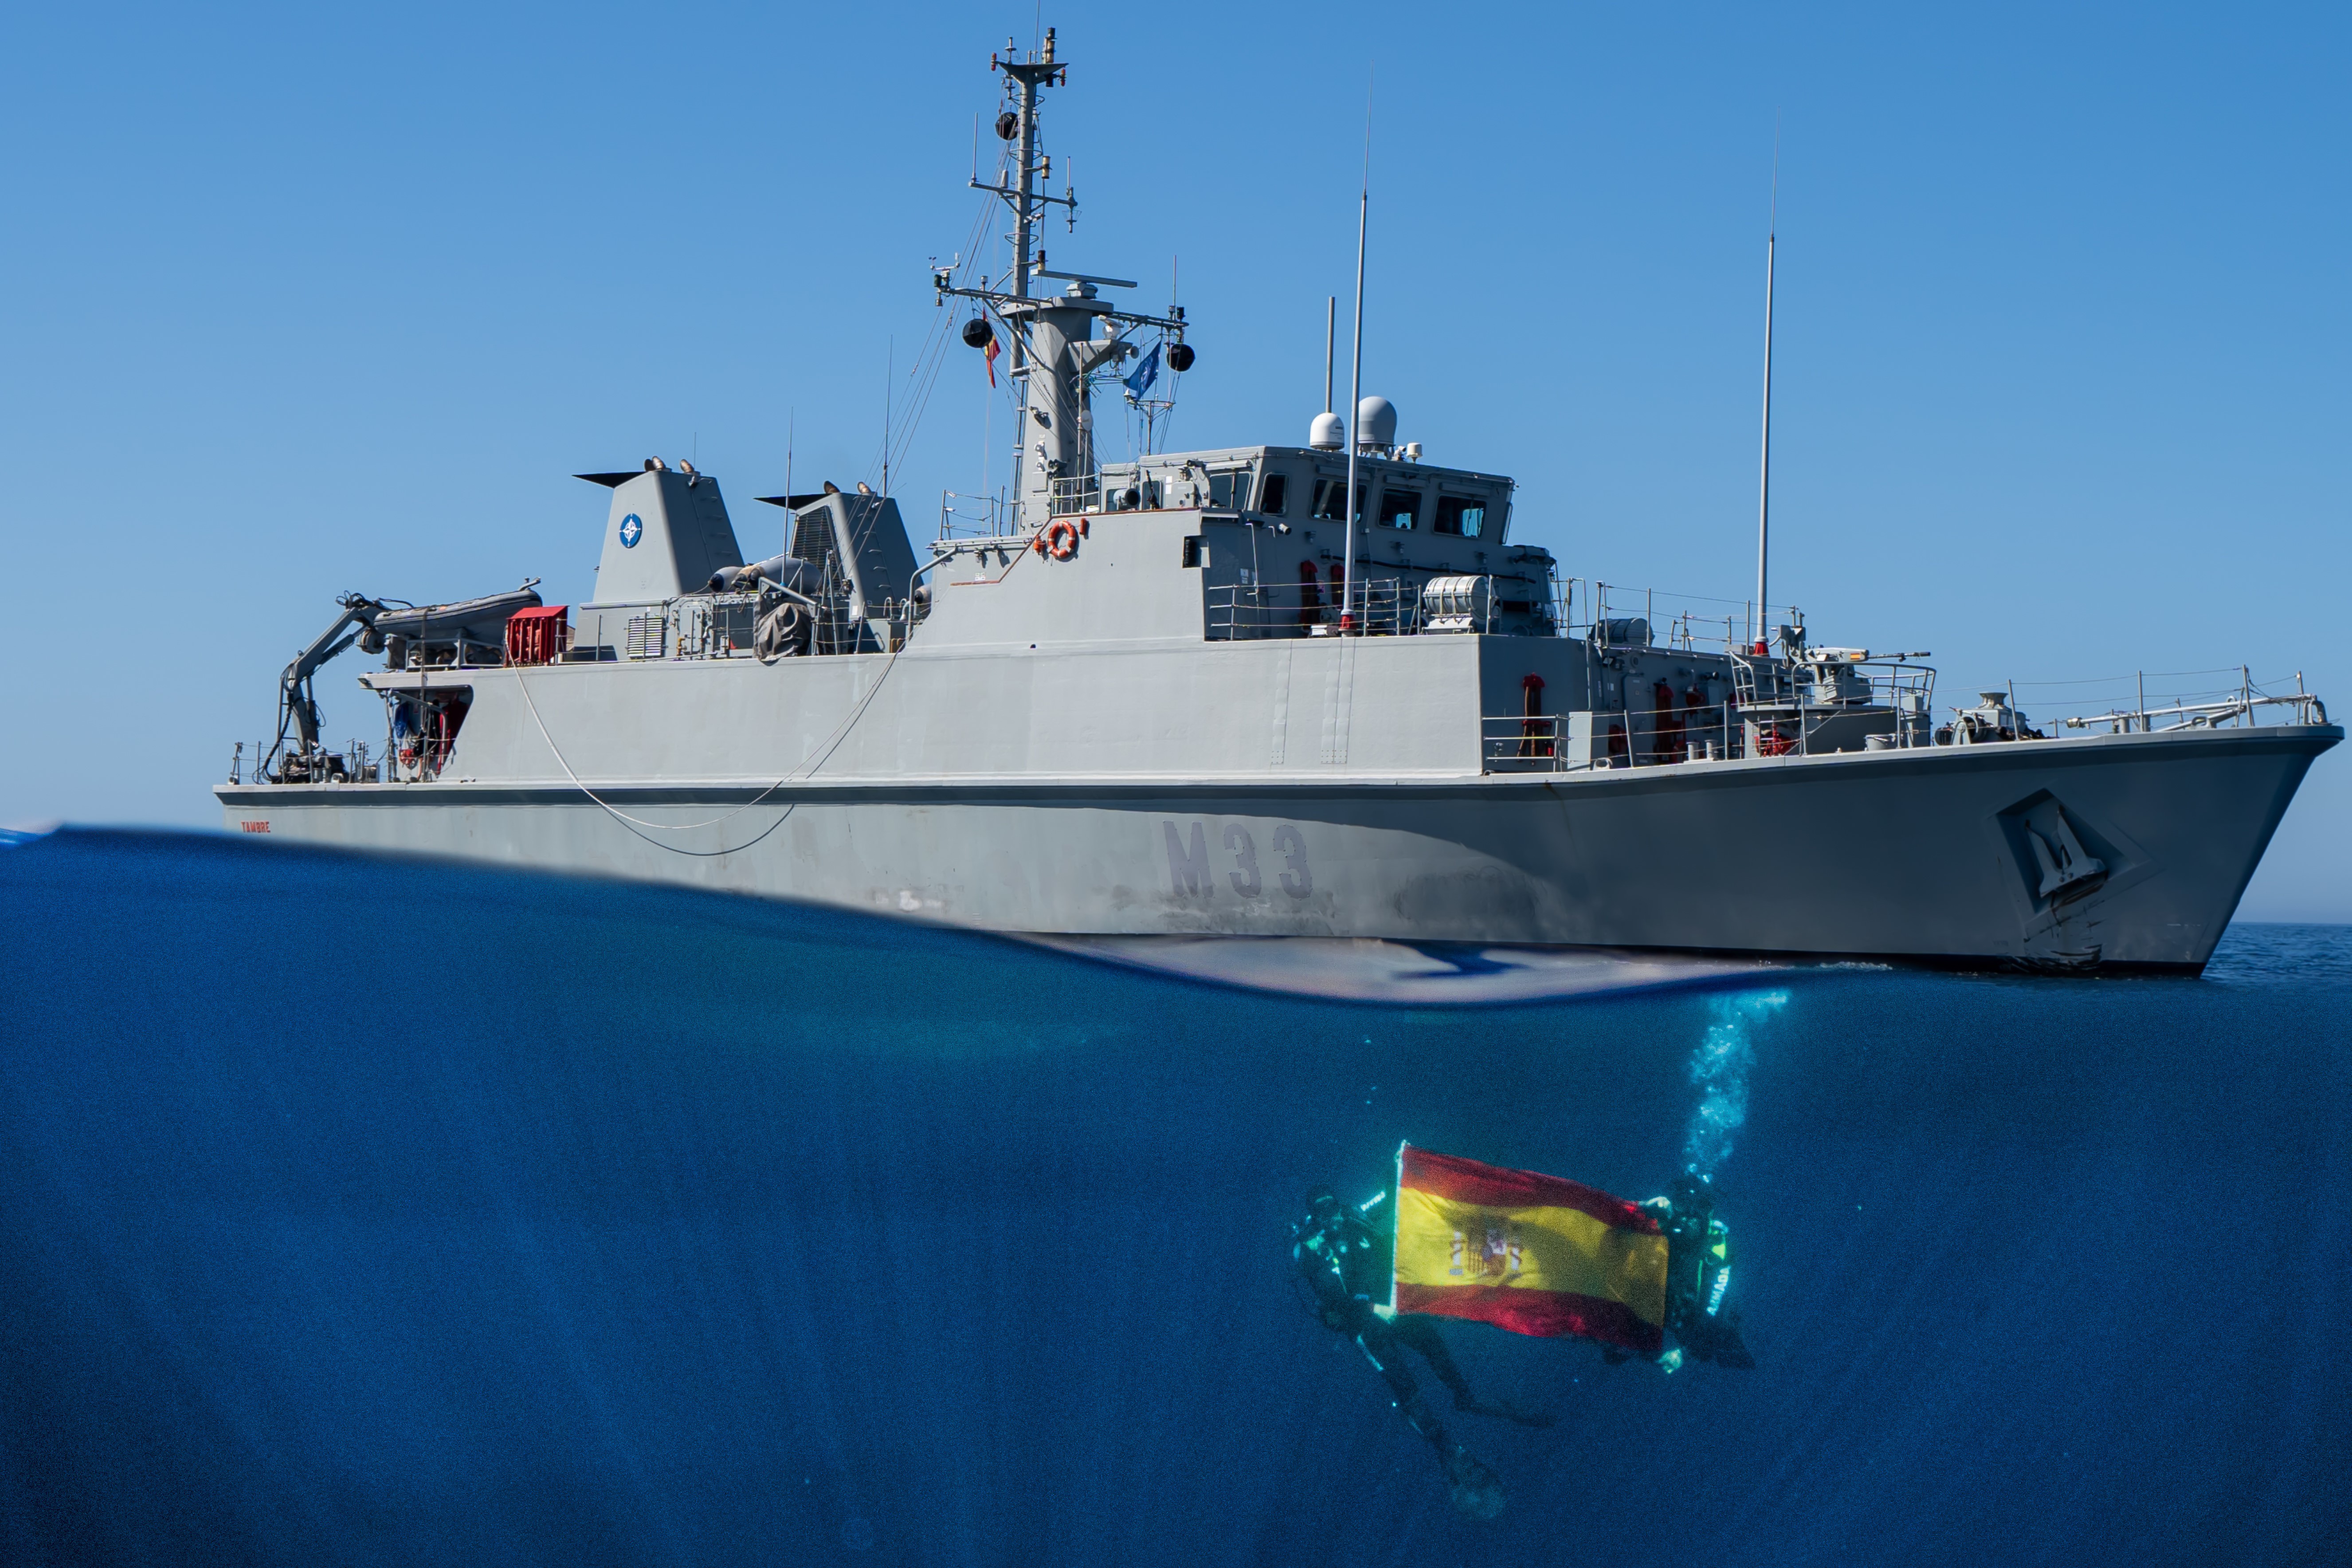 Divers from the Tambre minehunter